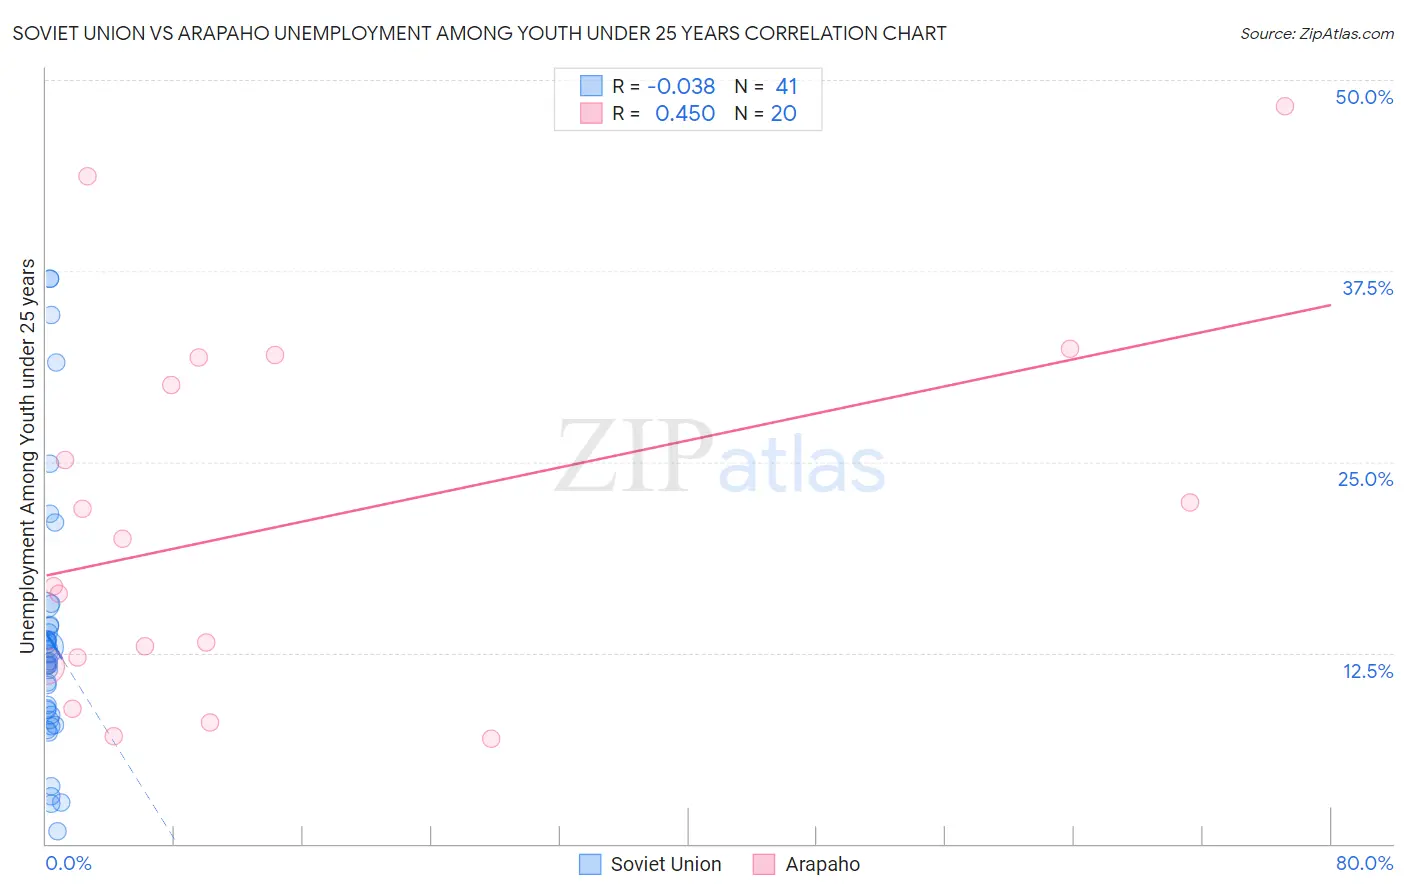 Soviet Union vs Arapaho Unemployment Among Youth under 25 years